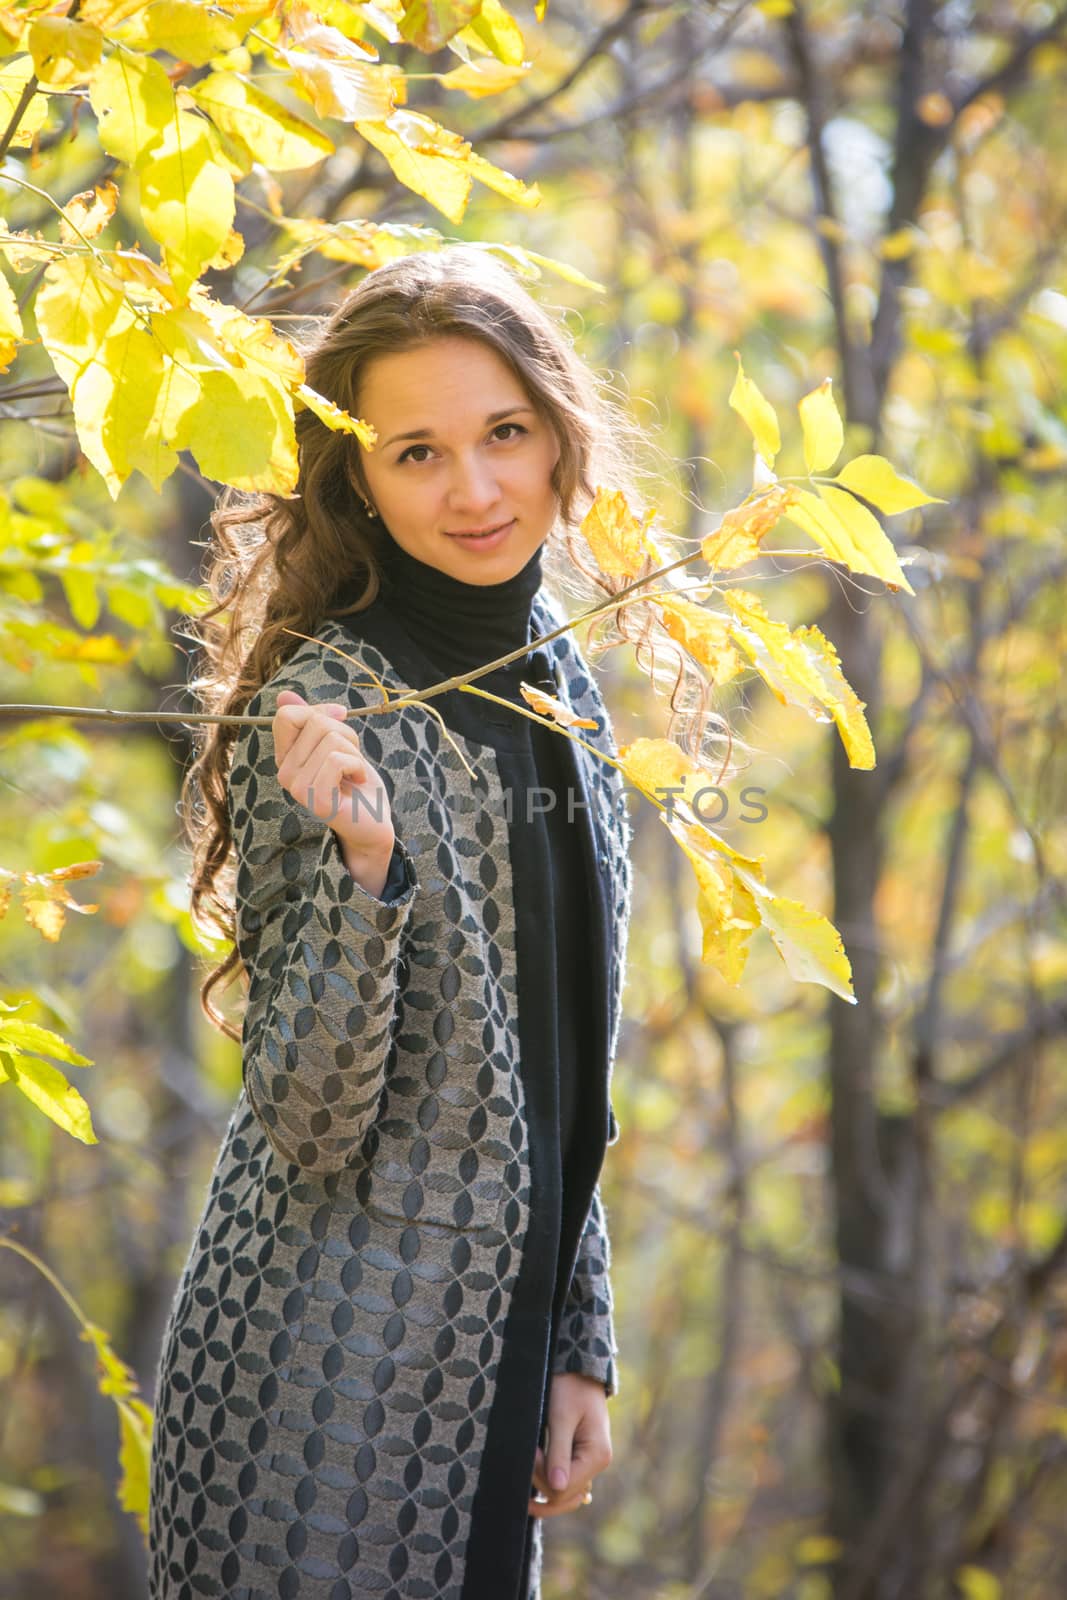 Cute young girl holding a twig with yellow leaves against the backdrop of autumn yellow forest by Madhourse